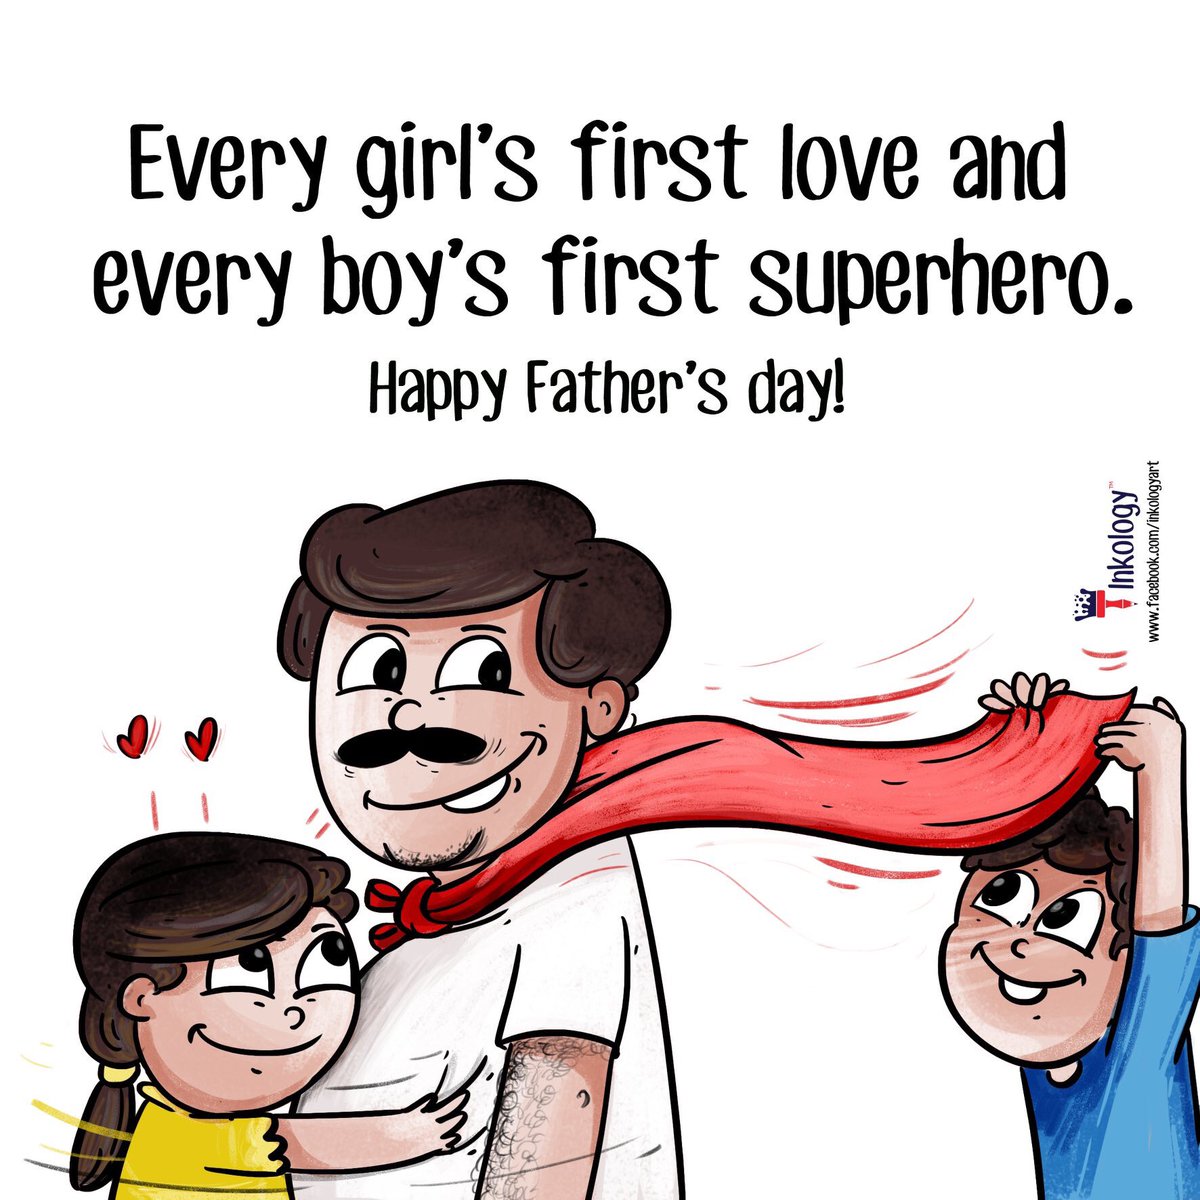 #happyfathersday 
#dad #superherodad #firstlove #father #fathersday
#supportsystem